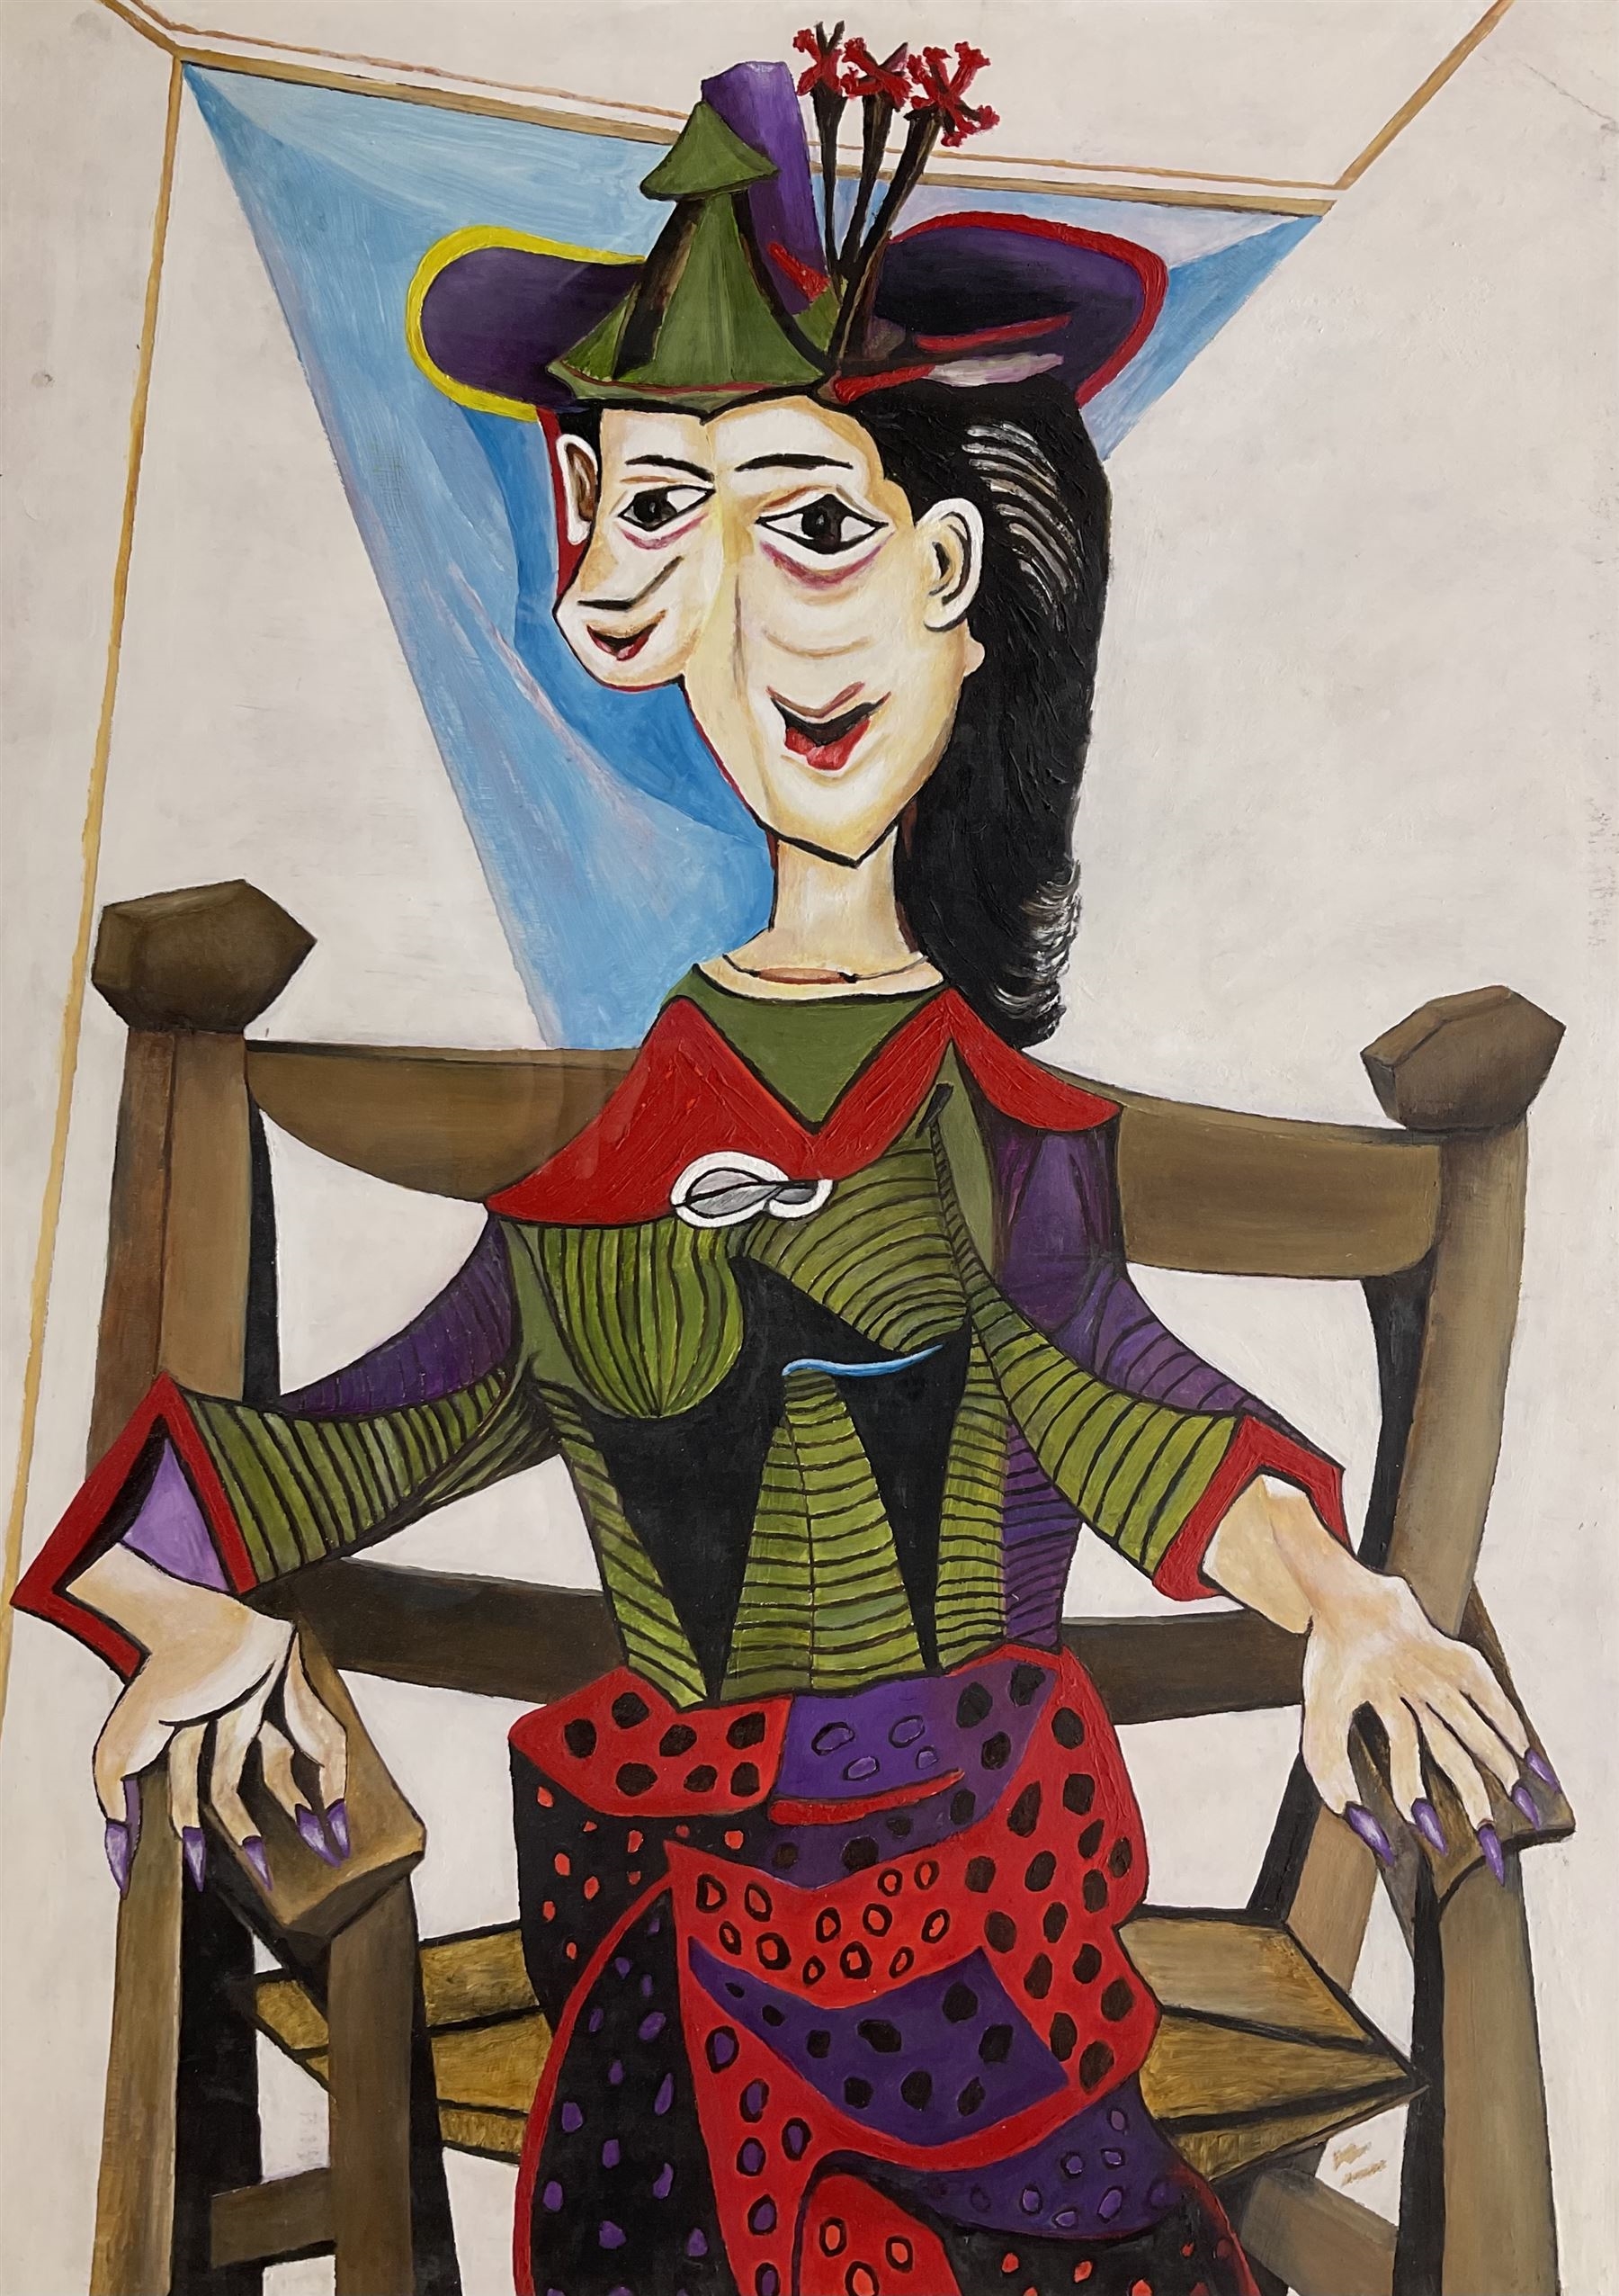 Artwork by Pablo Picasso, Dora Maar au Chat, Made of oil on board